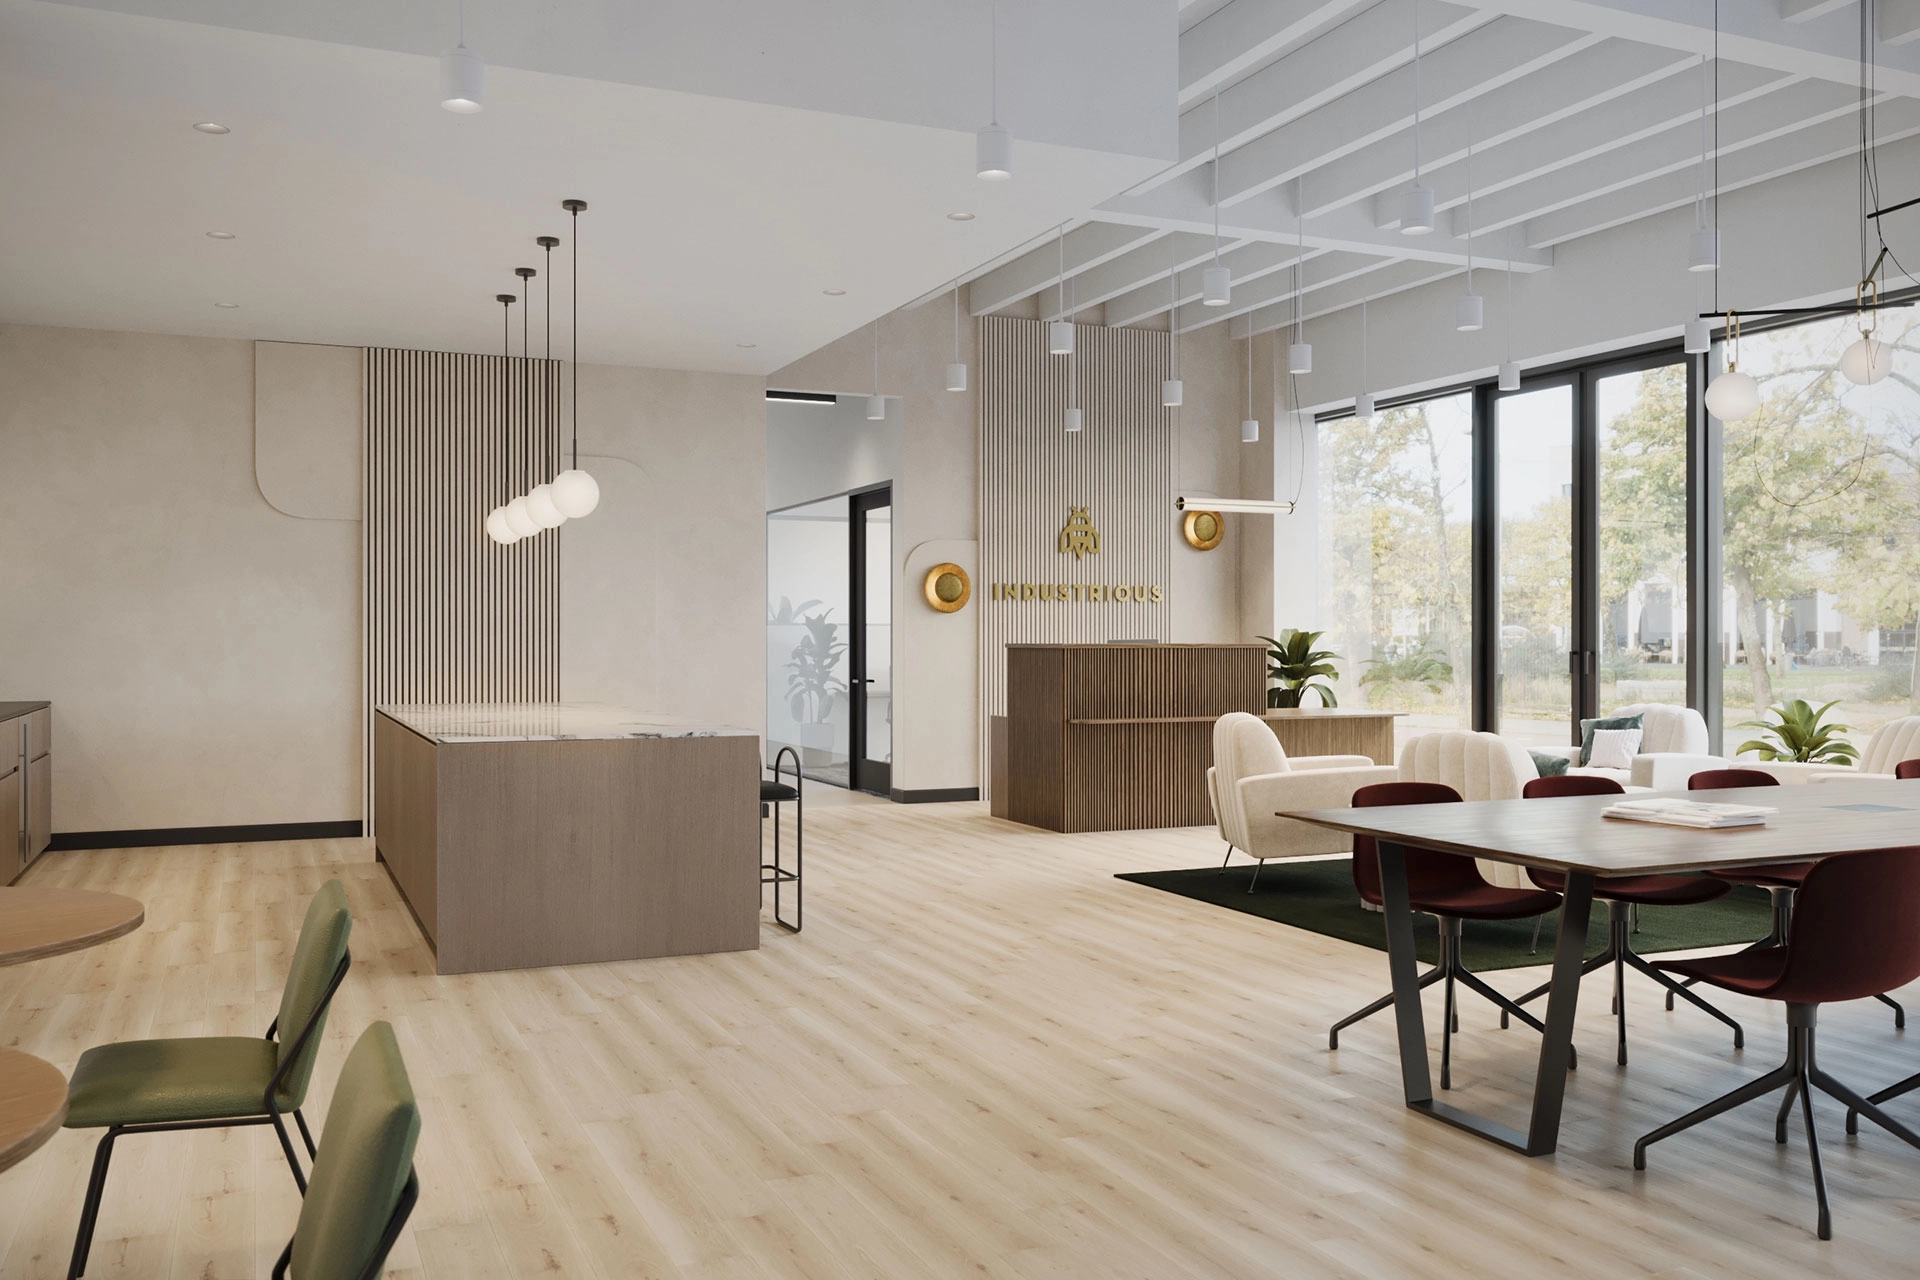 Modern coworking office reception area with minimalist decor and wooden floors.